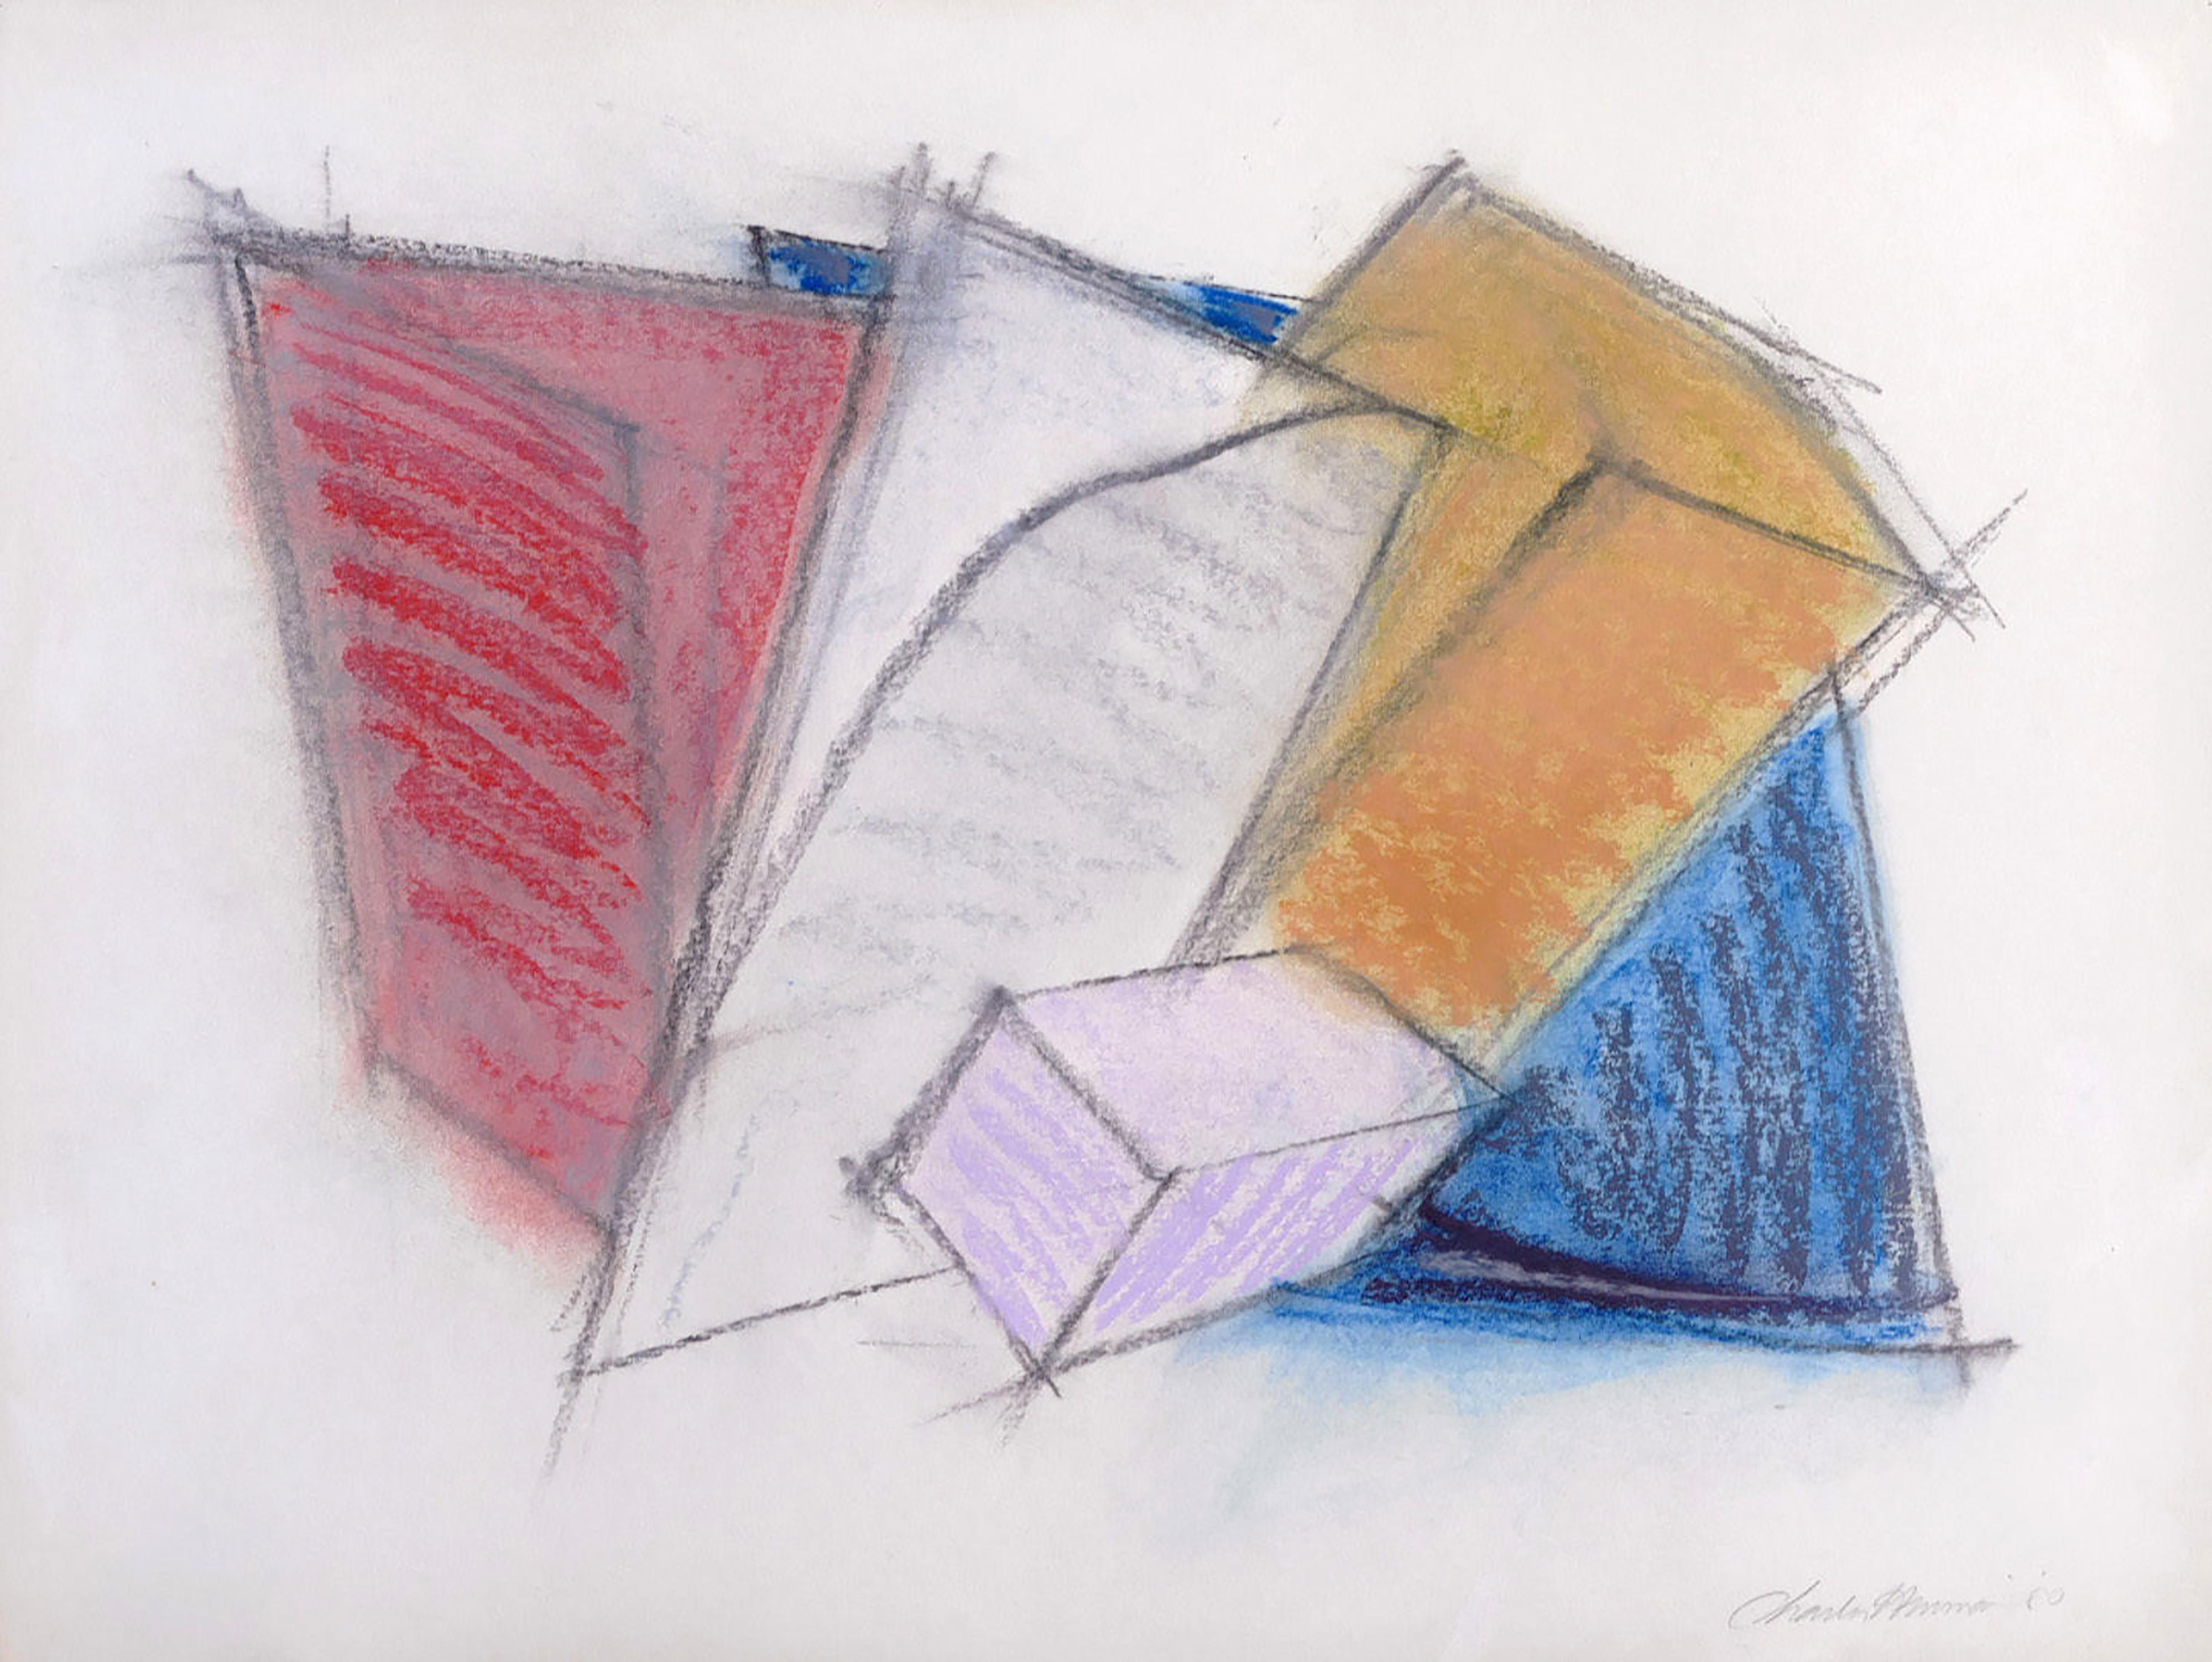 Untitled Minimalist Drawing (Mid-Century Modern Geometric Abstraction) - Art by Charles Hinman